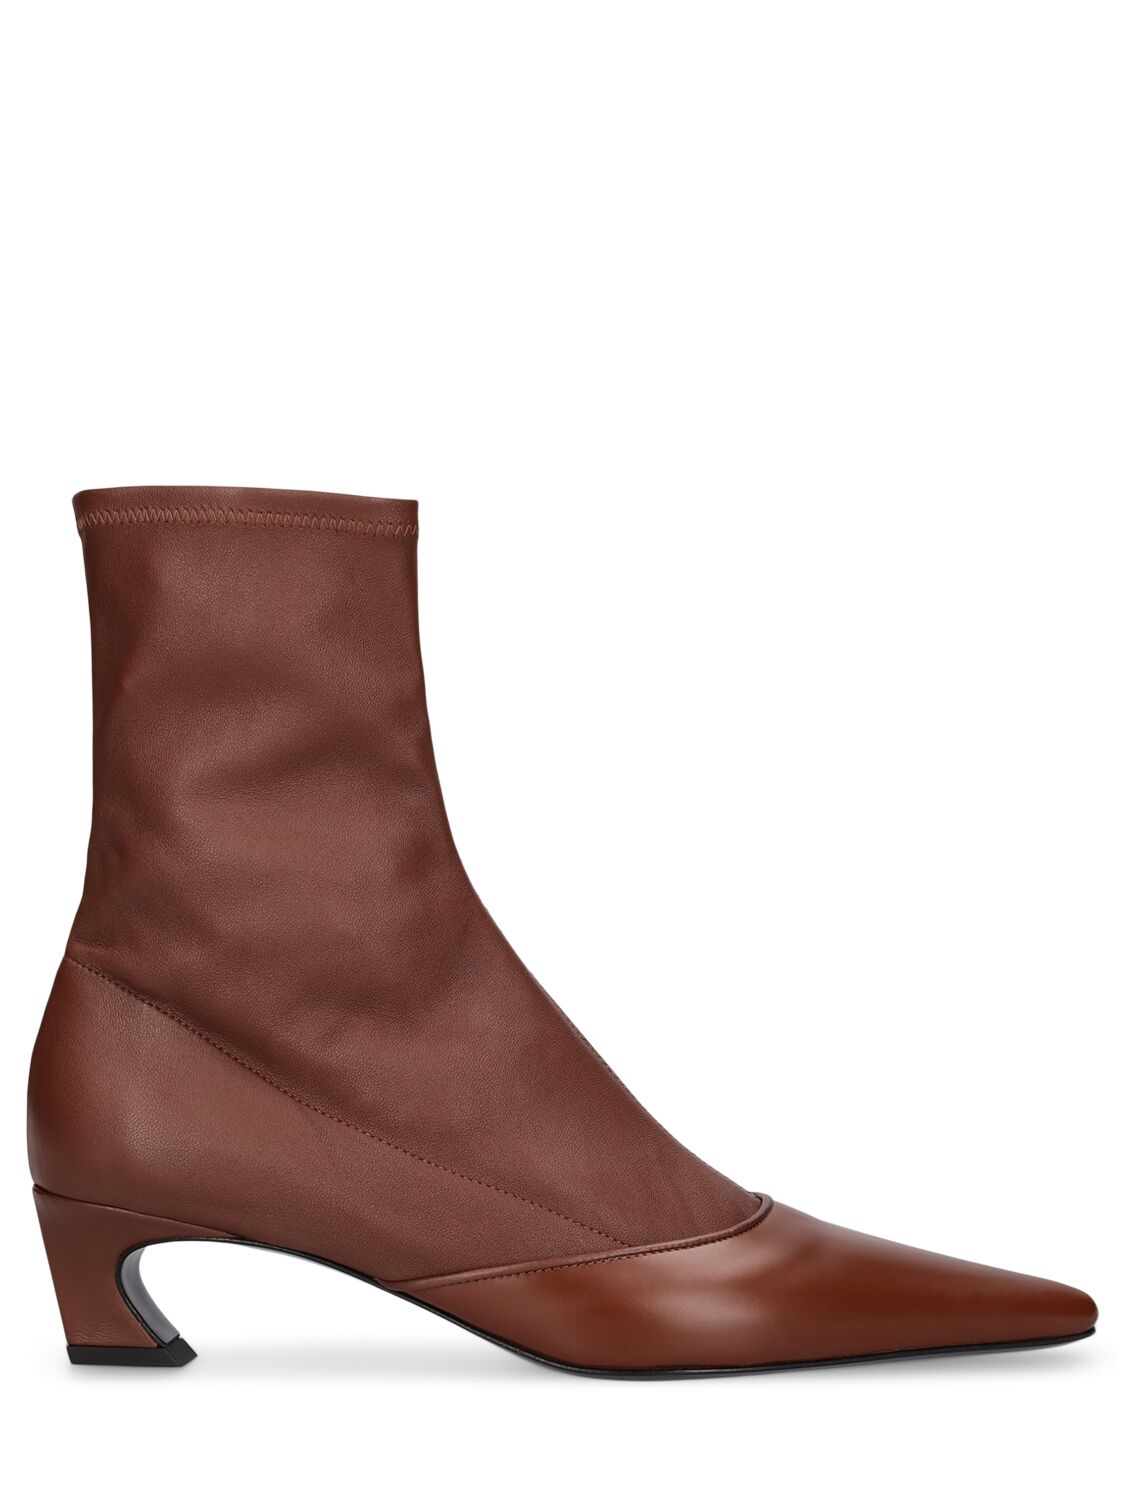 Acne Studios 45mm Bano Leather Ankle Boots In Brown